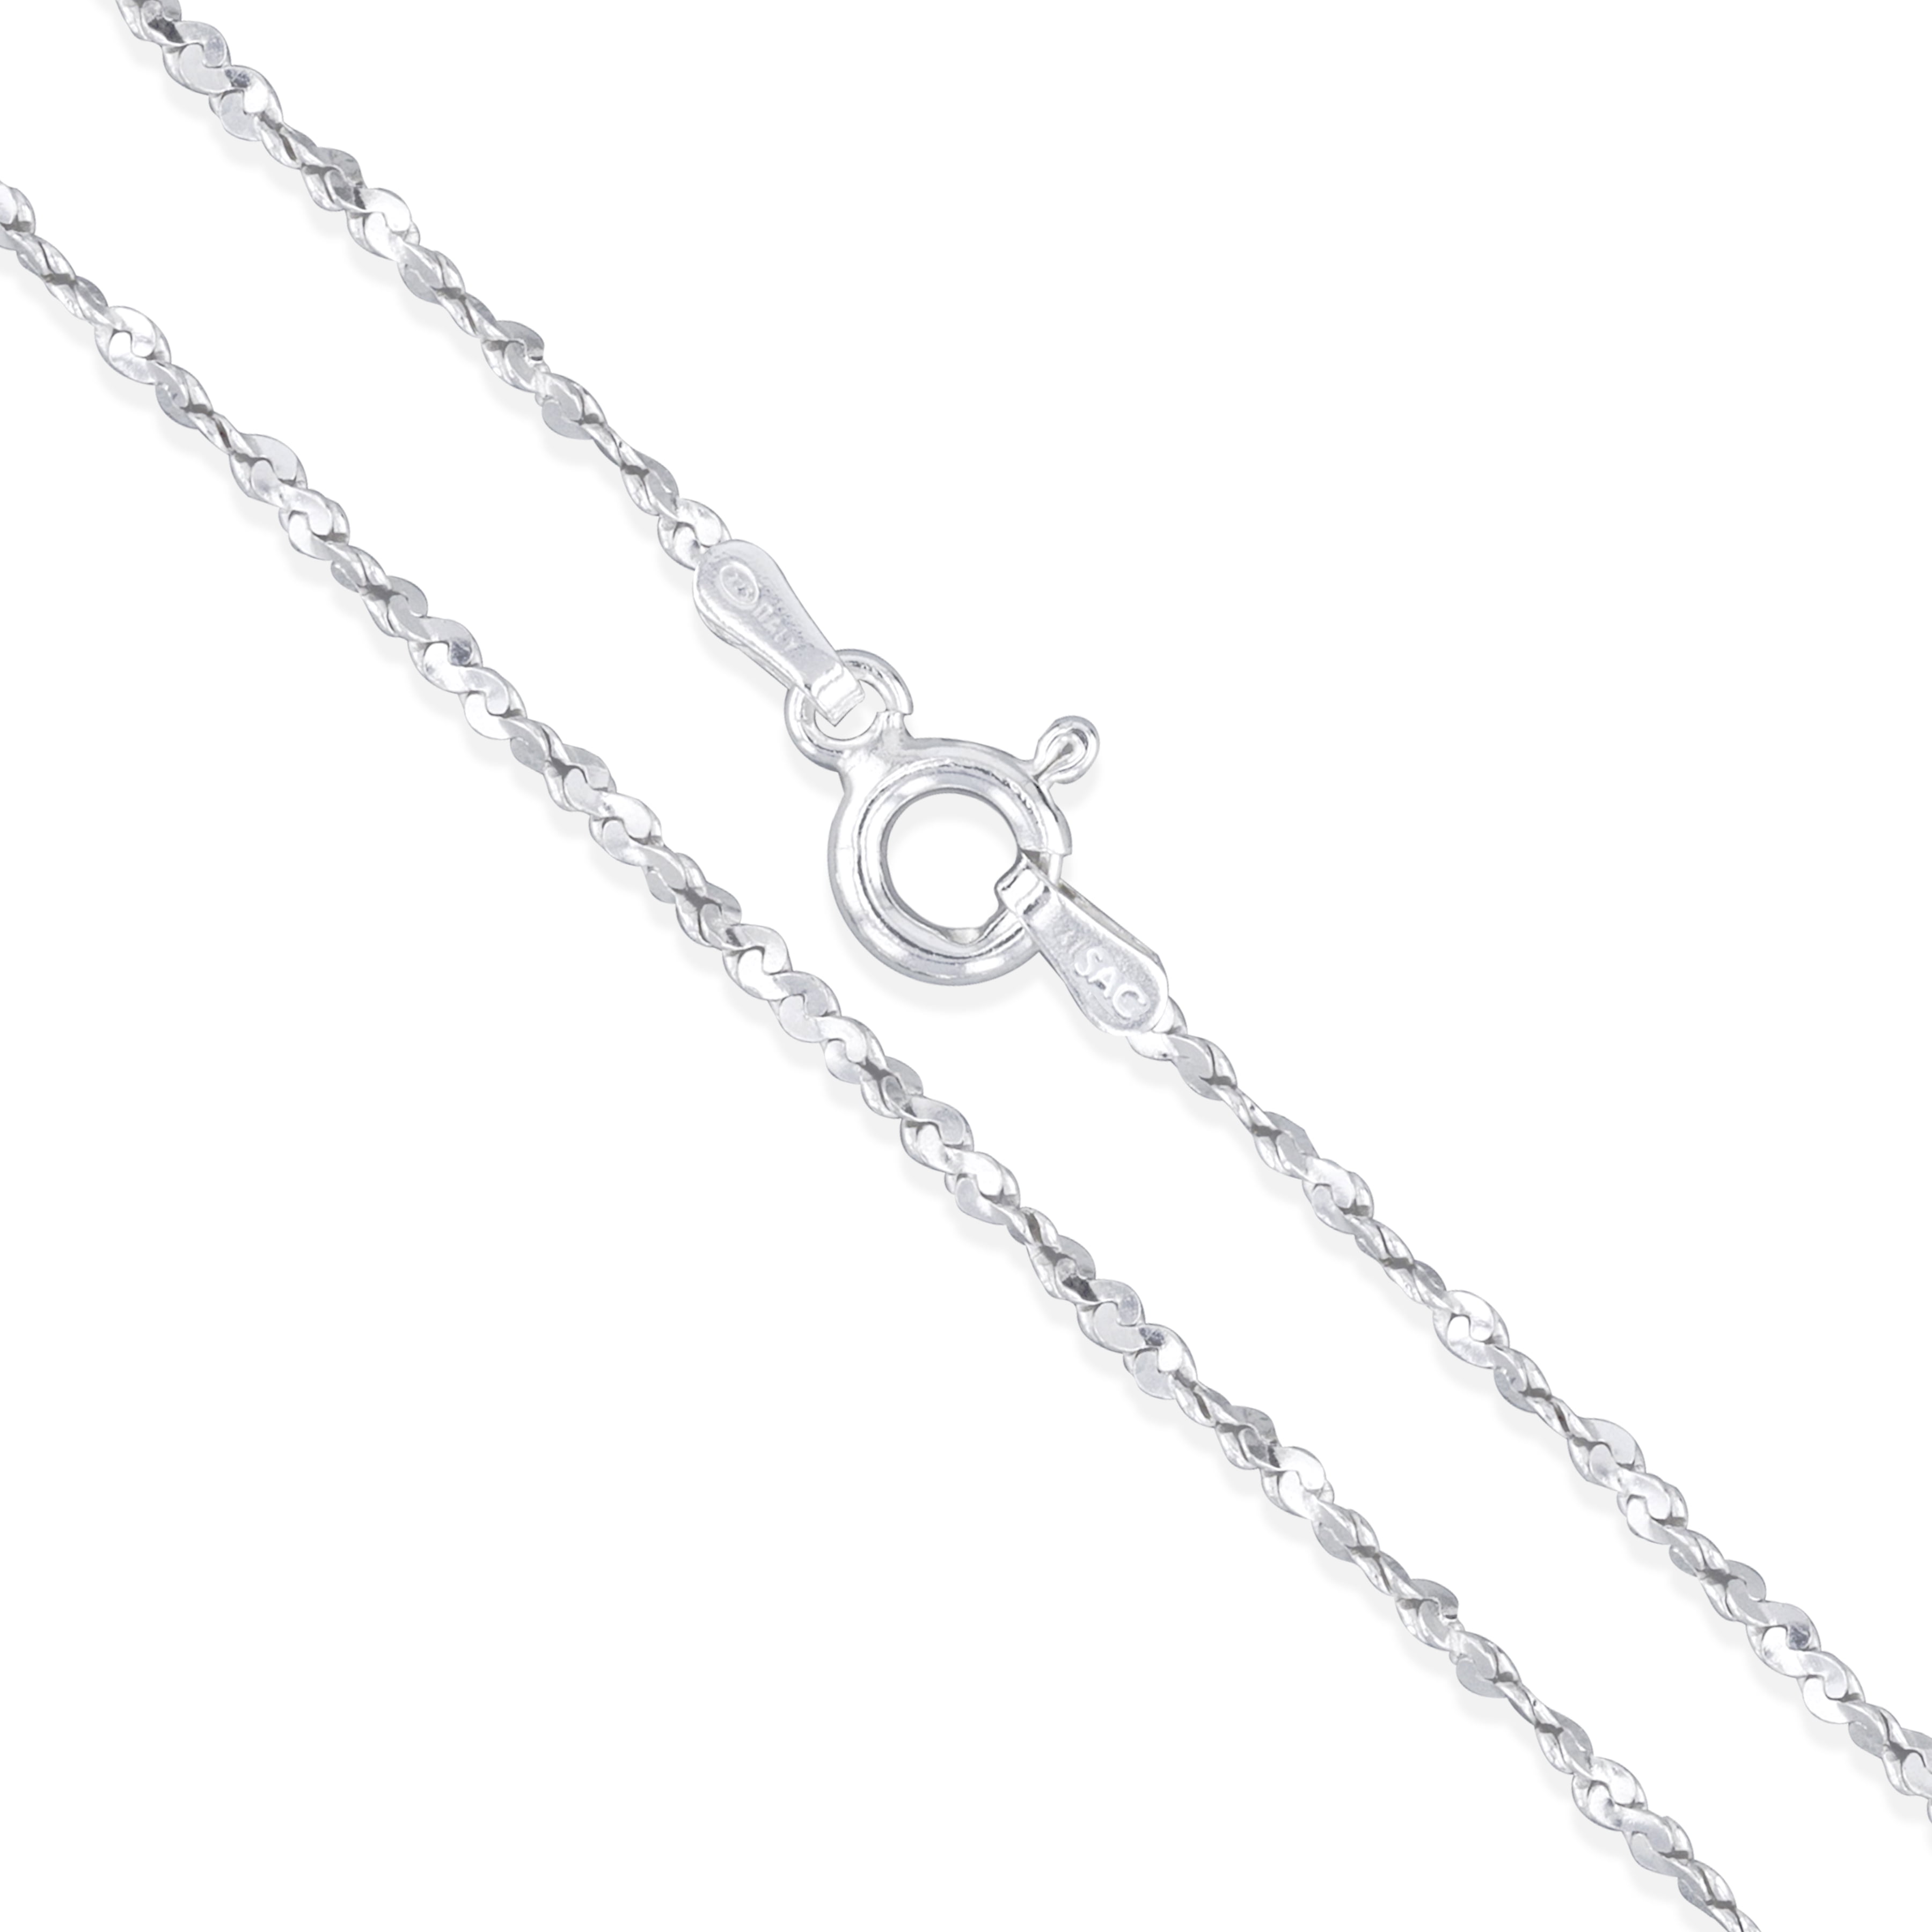 Men's Women's 14K Sterling Silver 925 Plated Thin Short Rope Chain